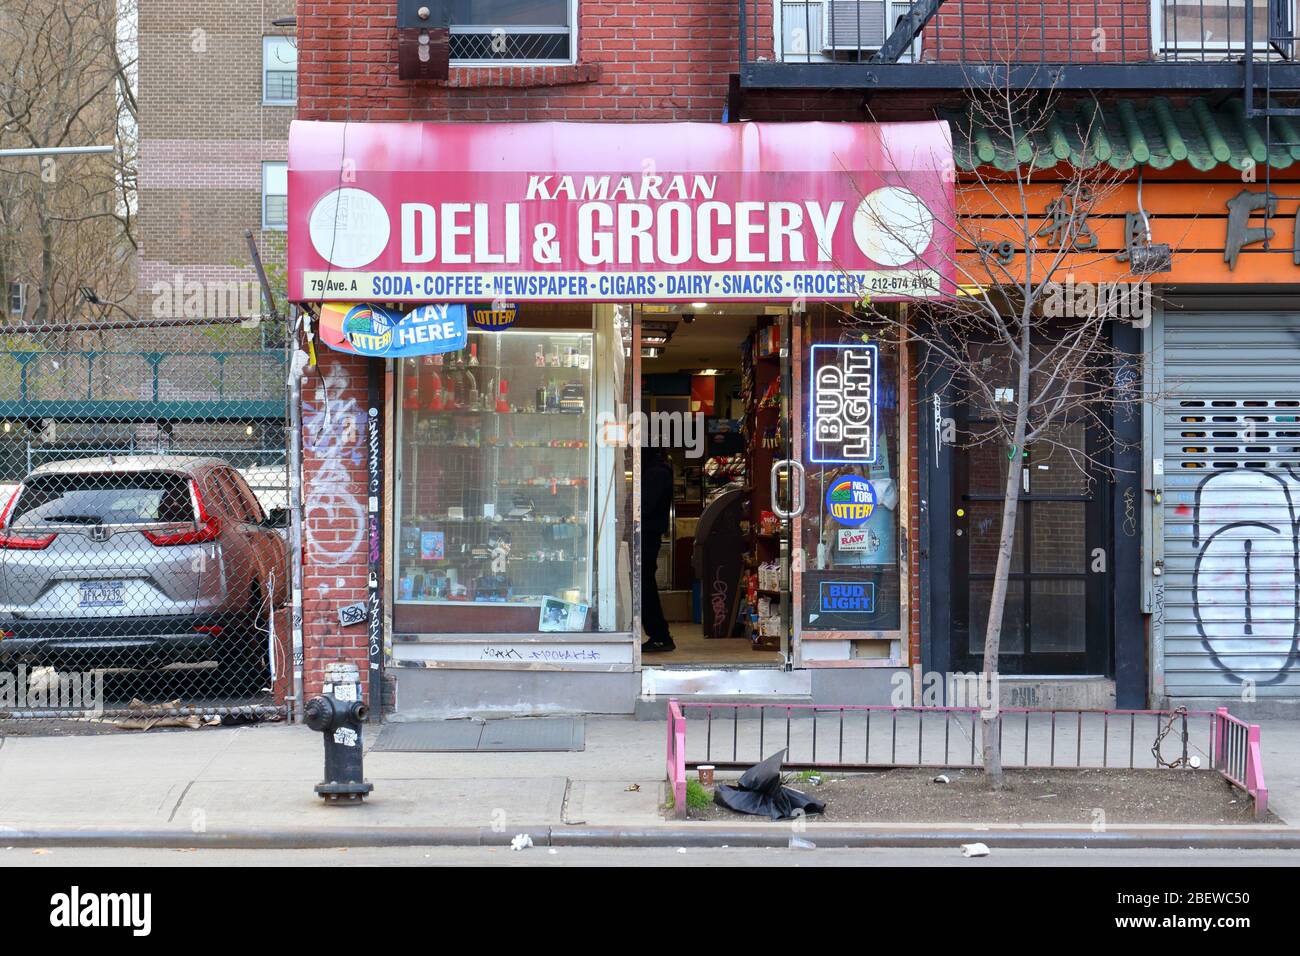 Kamaran Deli & Grocery, 79 Avenue A, New York, NYC storefront photo of a convenience store in the East Village neighborhood of Manhattan. Stock Photo